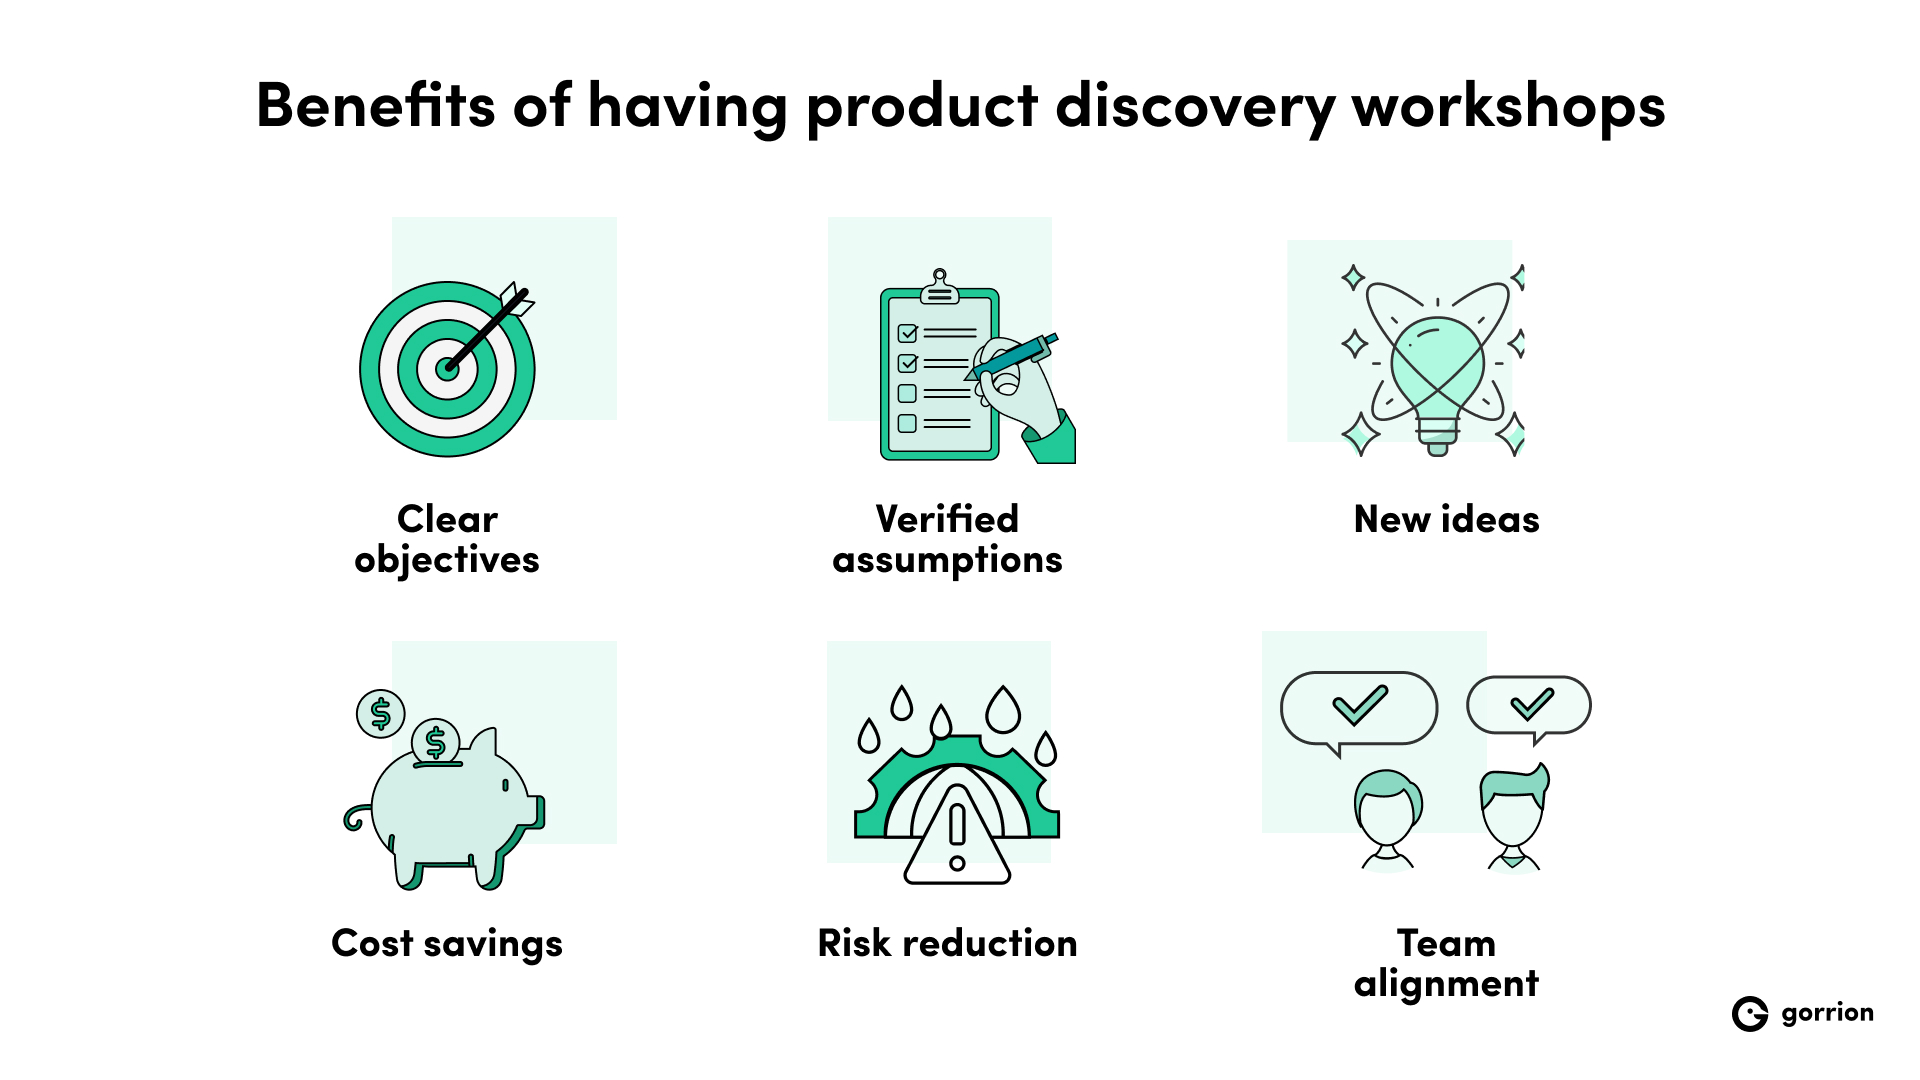 Benefits of having product discovery workshops: clear objectives, verified assumptions, new ideas, cost savings, risk reduction, team alignment